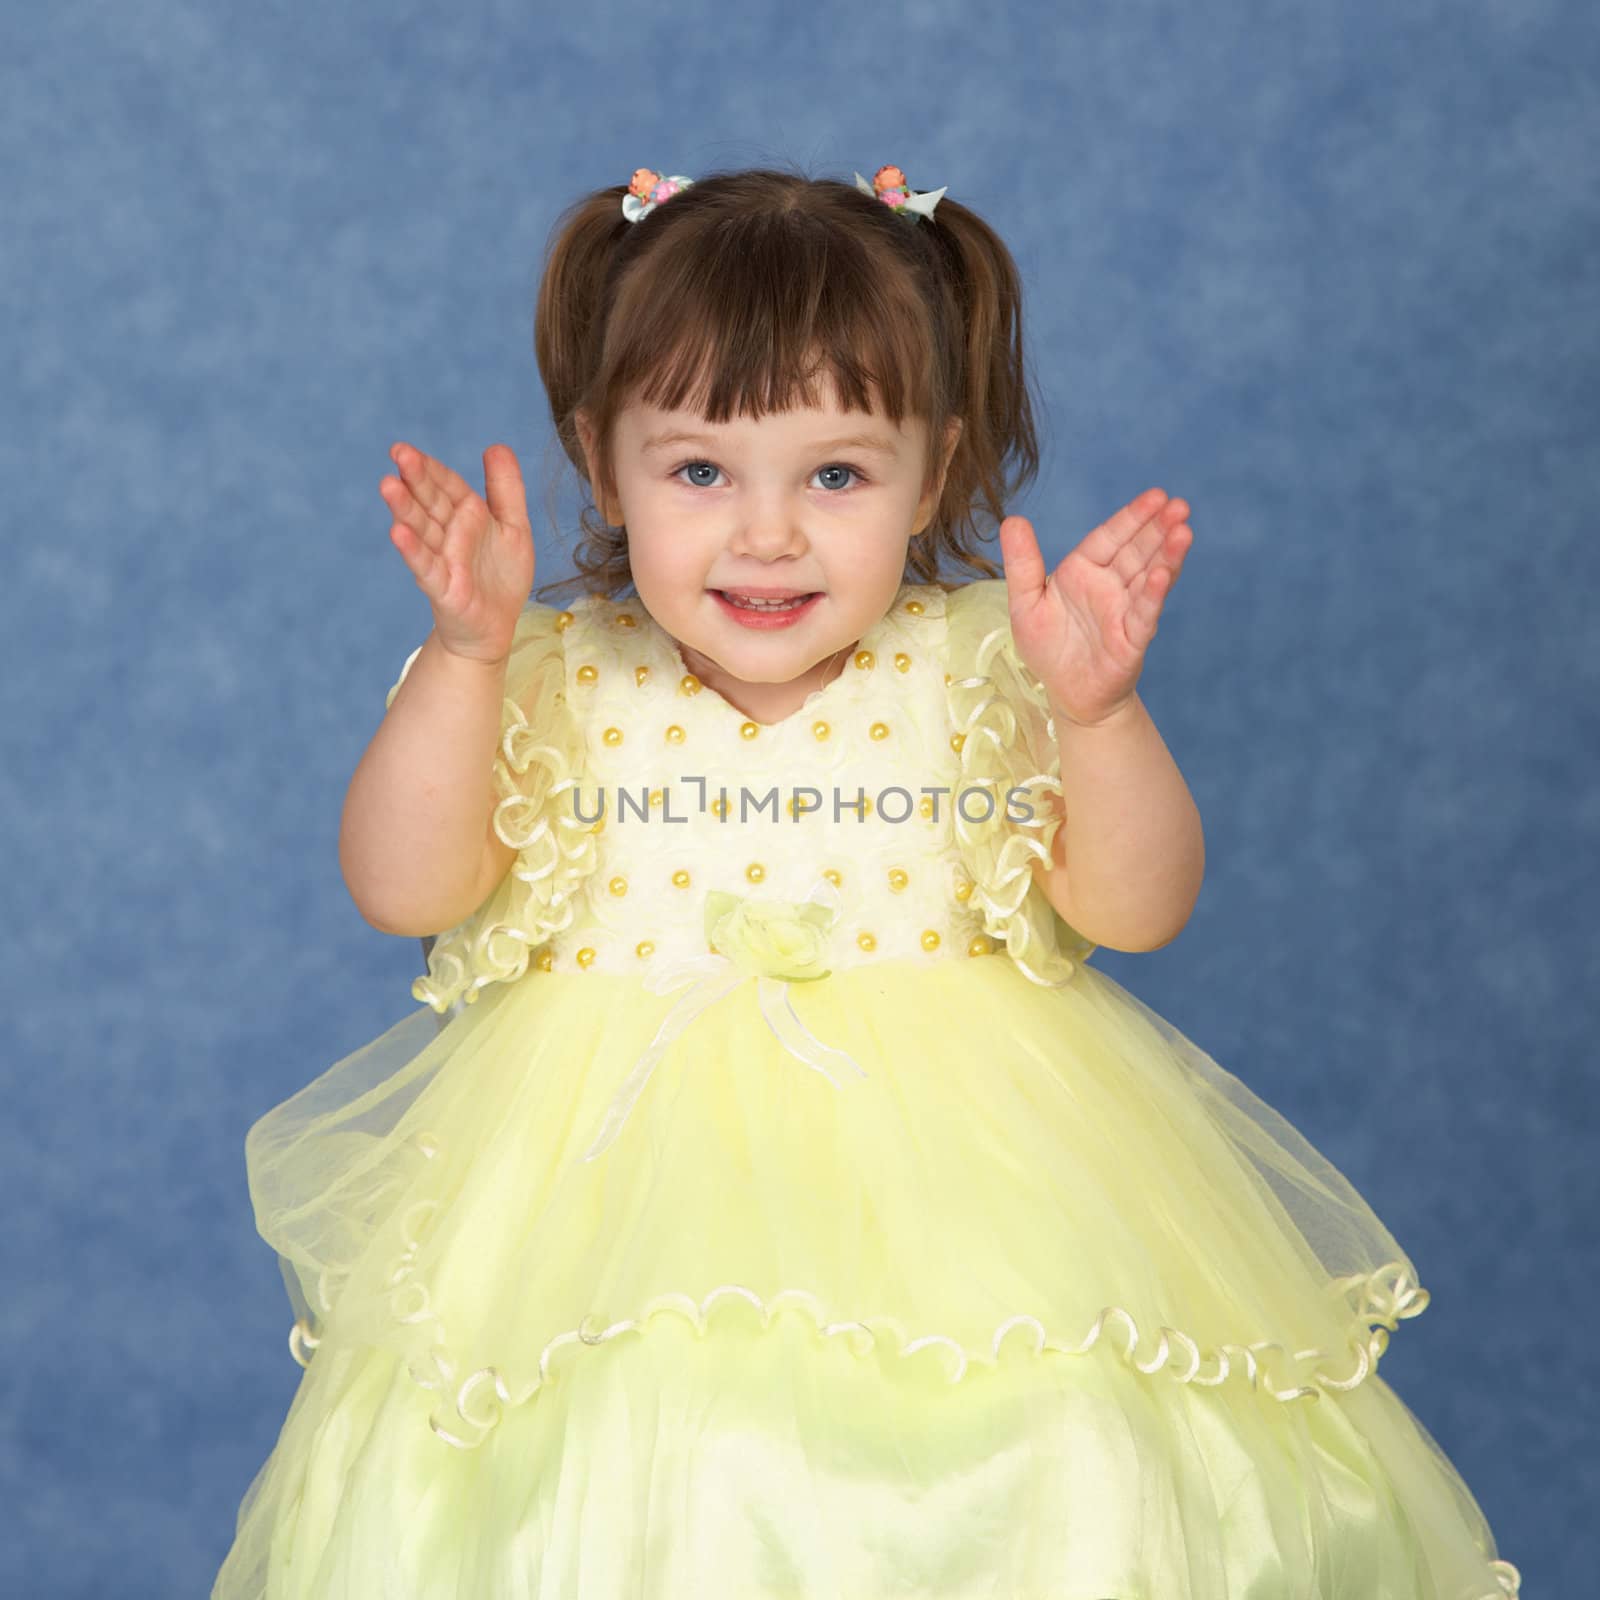 The little girl in a beautiful dress claps his hands on a blue background